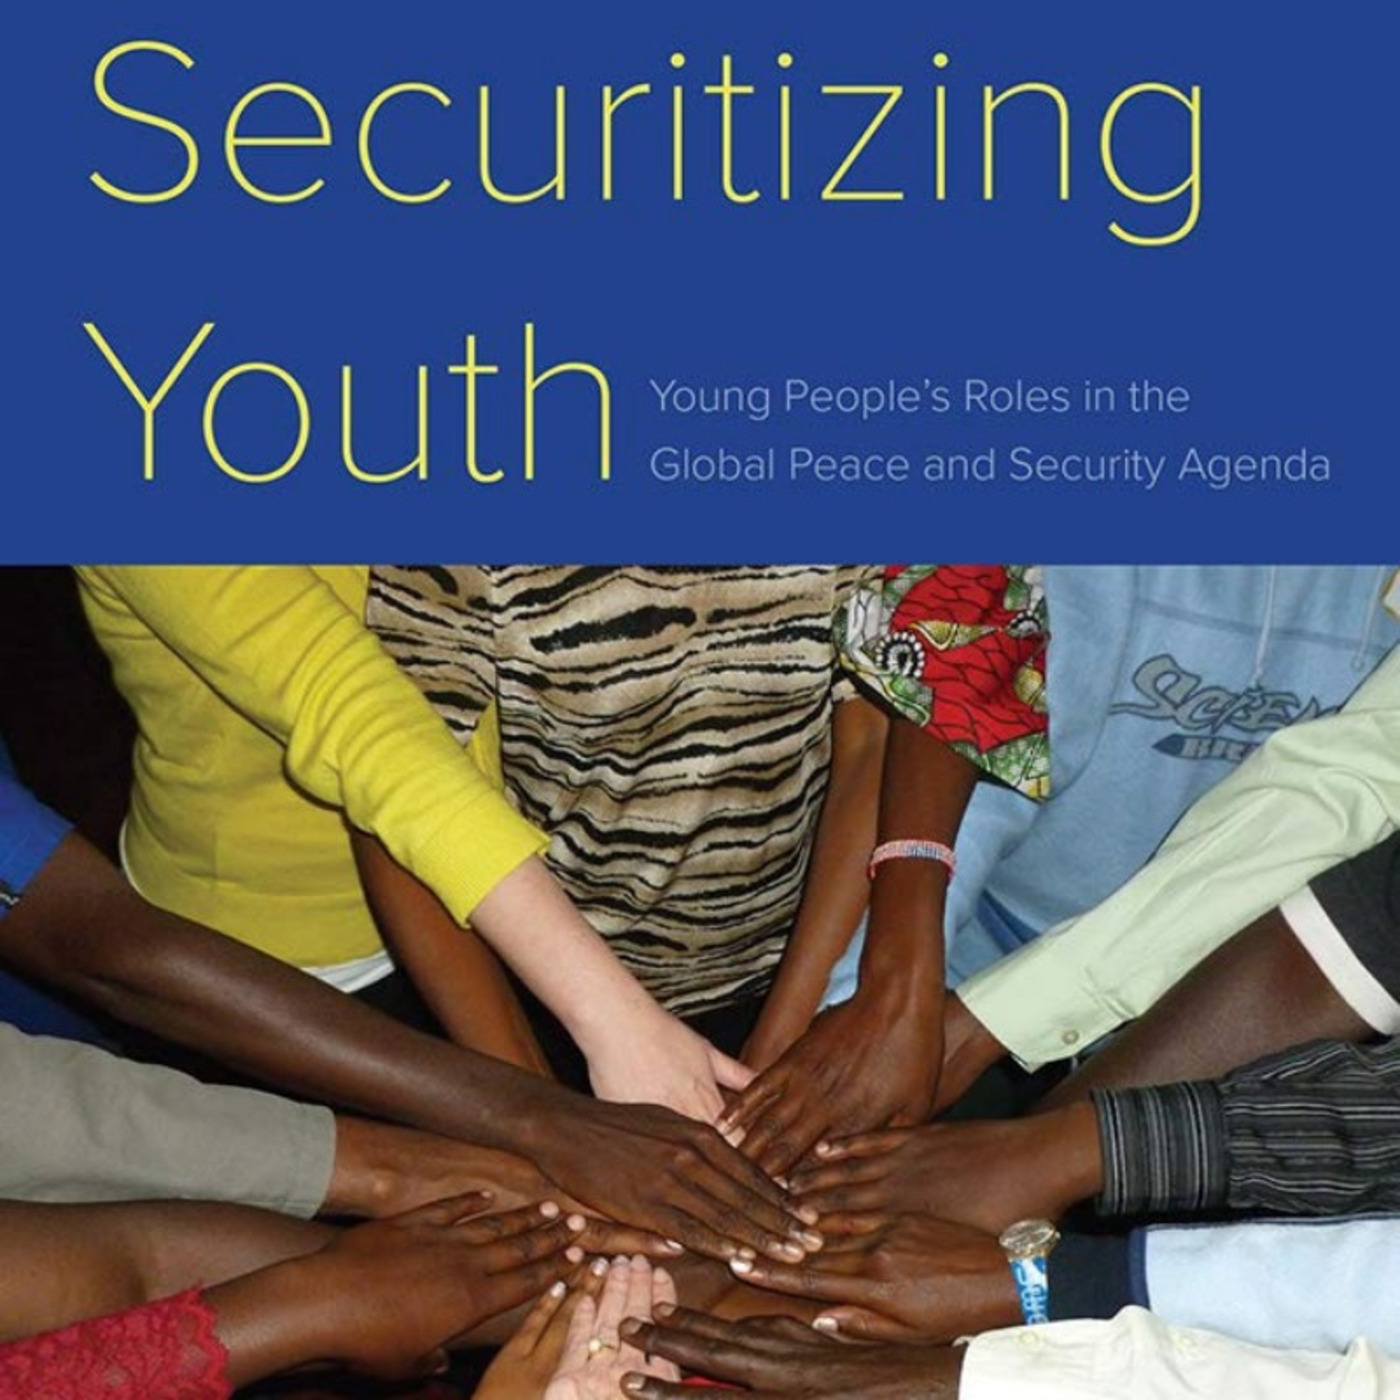 Episode 242: A Conversation with Marisa O. Ensor on Securitizing Youth and Youth’s Role in Peace and Security Agendas